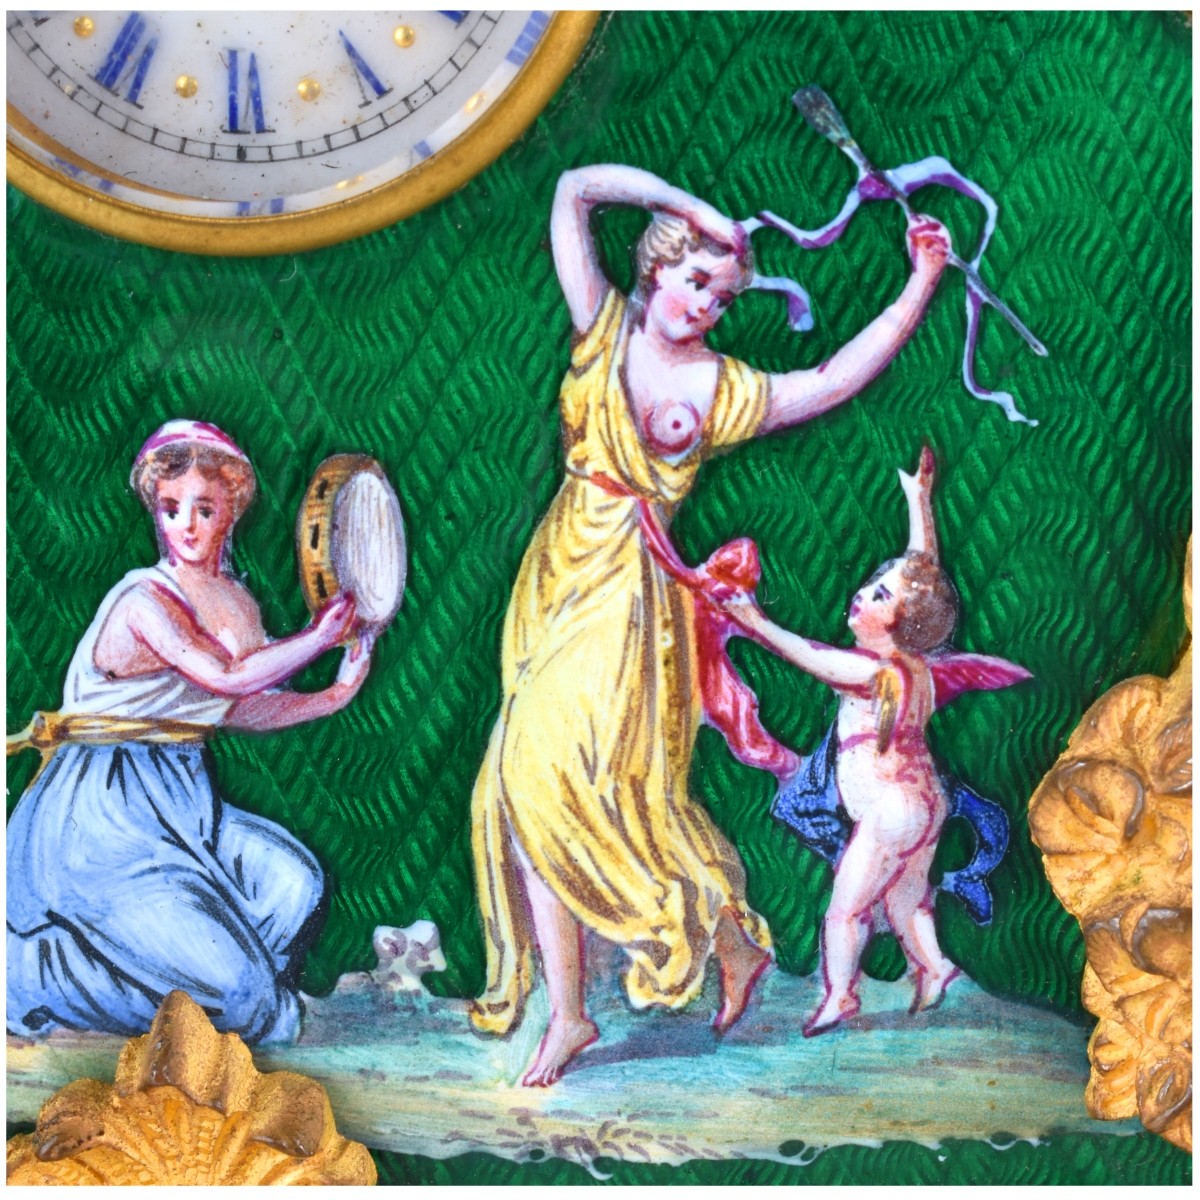 Two Antique Bronze and Enameled Miniature Clocks - Image 2 of 6